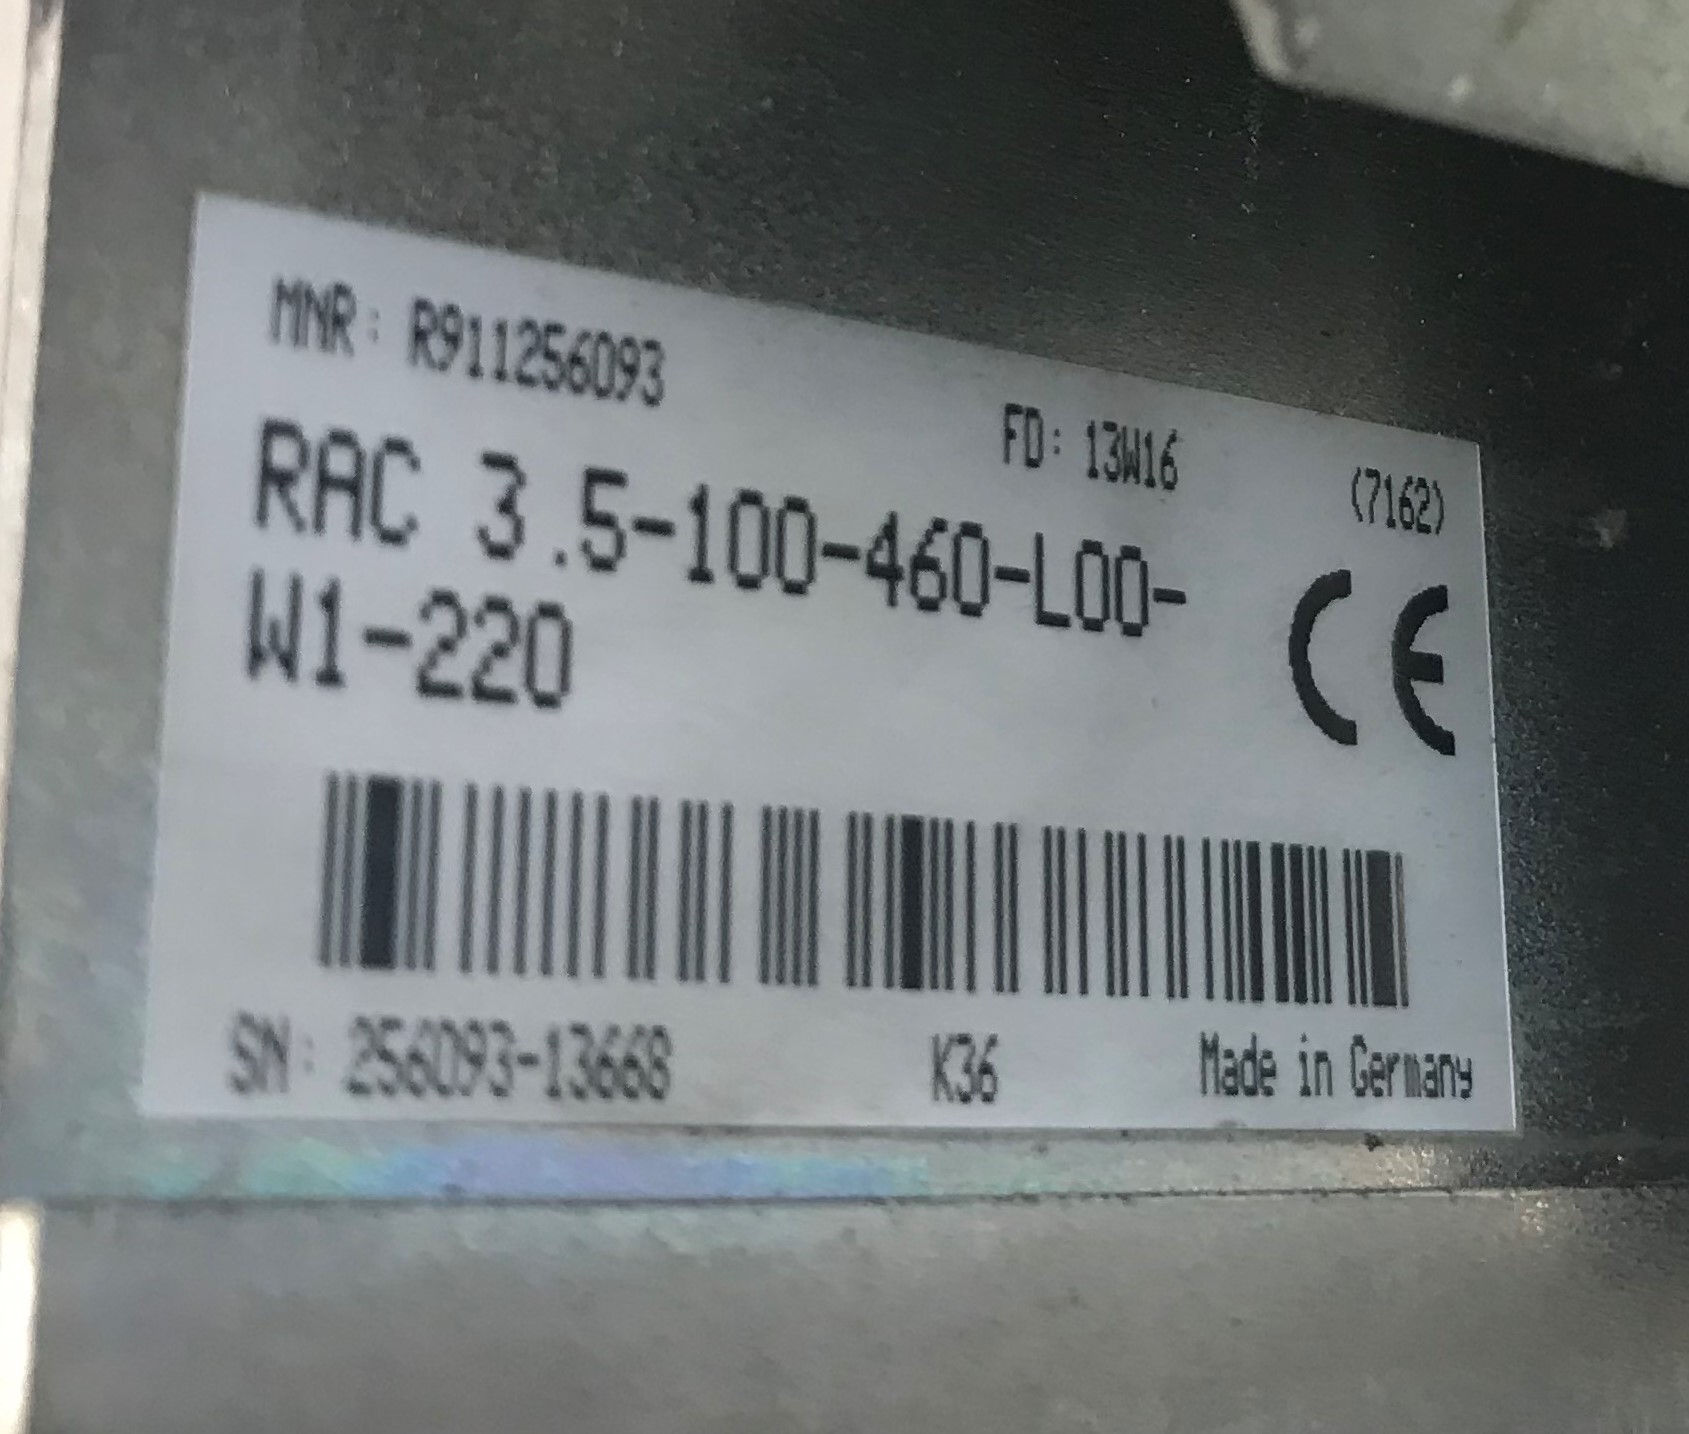 Indramat AC-Mainspindle Drive RAC 3.5-100-460-L00-W1-220